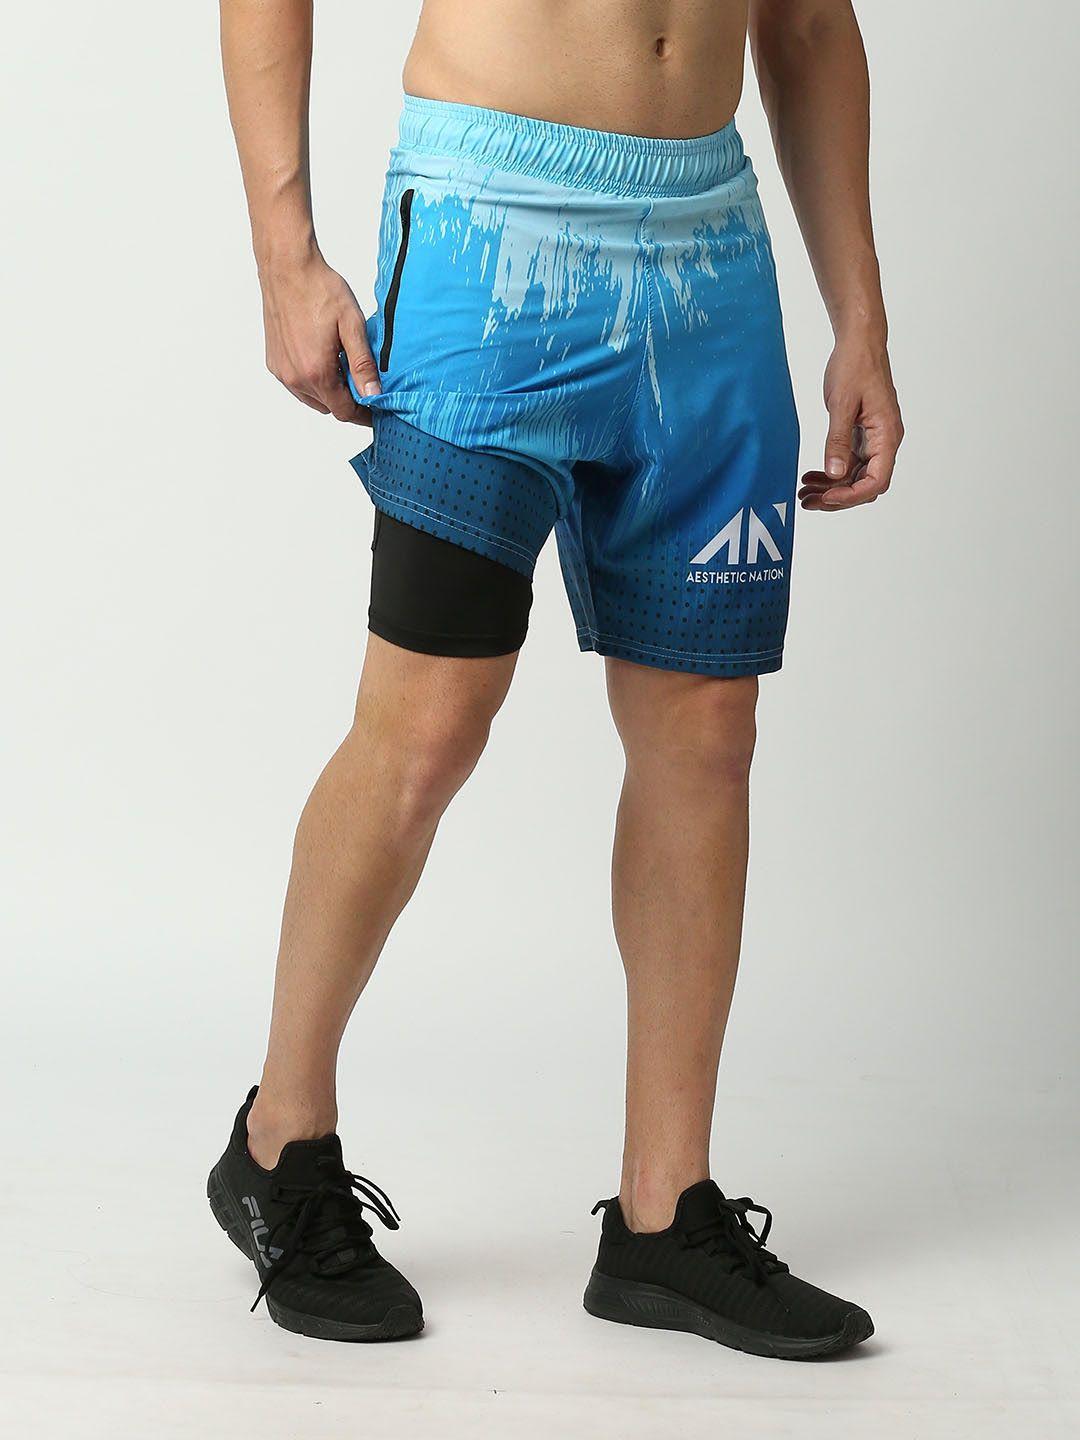 aesthetic-nation-men-blue-printed-slim-fit-training-or-gym-sports-shorts